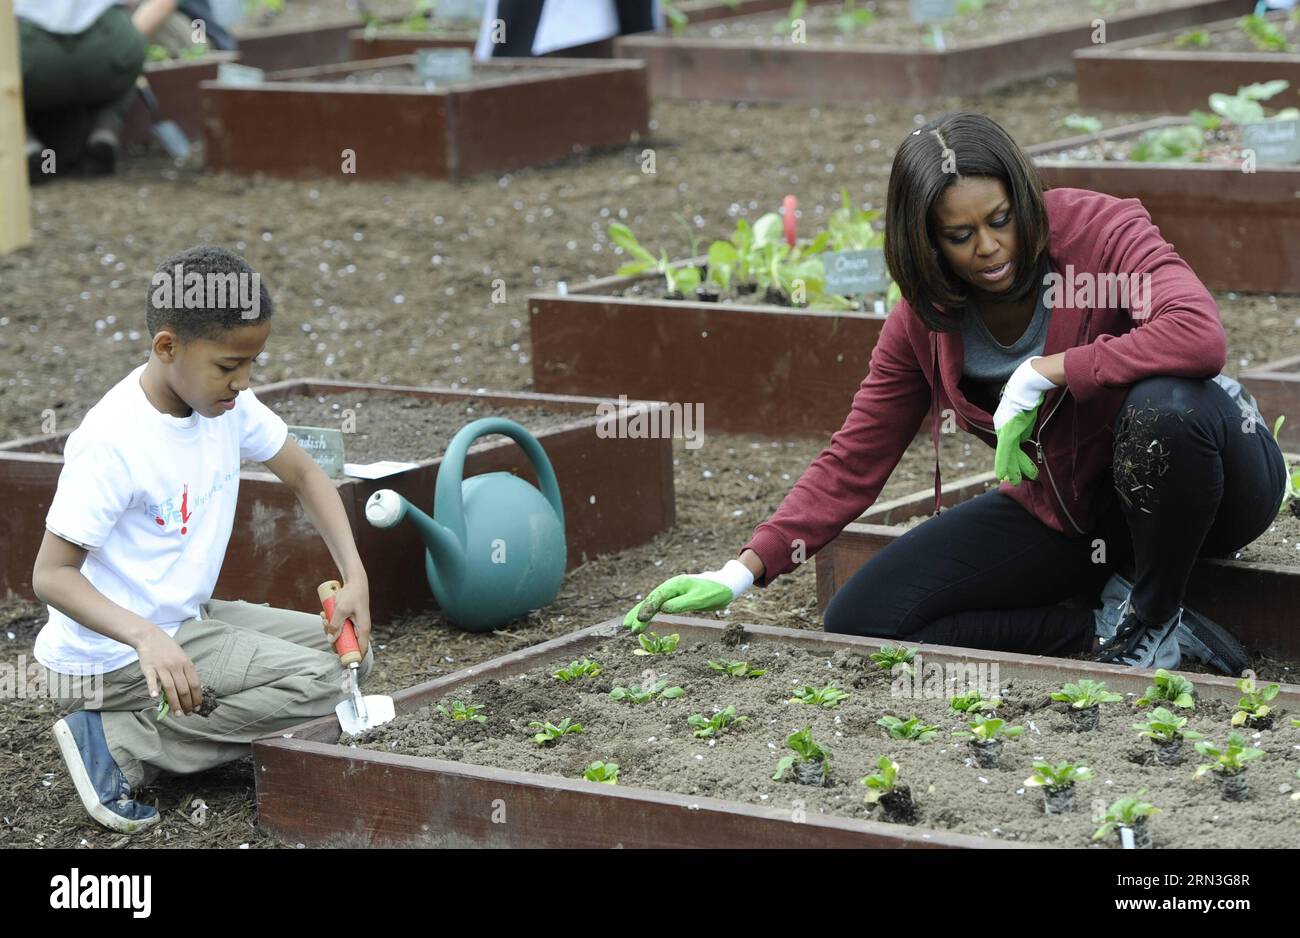 (150415) -- WASHINGTON D.C., April 15, 2014 -- U.S. First Lady Michelle Obama(R) plants with school children in the White House Kitchen Garden on the South Lawn of the White House in Washington D.C., capital of the United States, April 15, 2015. U.S. First Lady Michelle Obama joined FoodCorps leaders and local students to plant the White House Kitchen Garden for the seventh year in a row. ) US-WASHINGTON D.C.-WHITE HOUSE KITCHEN GARDEN BaoxDandan PUBLICATIONxNOTxINxCHN   Washington D C April 15 2014 U S First Lady Michelle Obama r Plants With School Children in The White House Kitchen Garden O Stock Photo